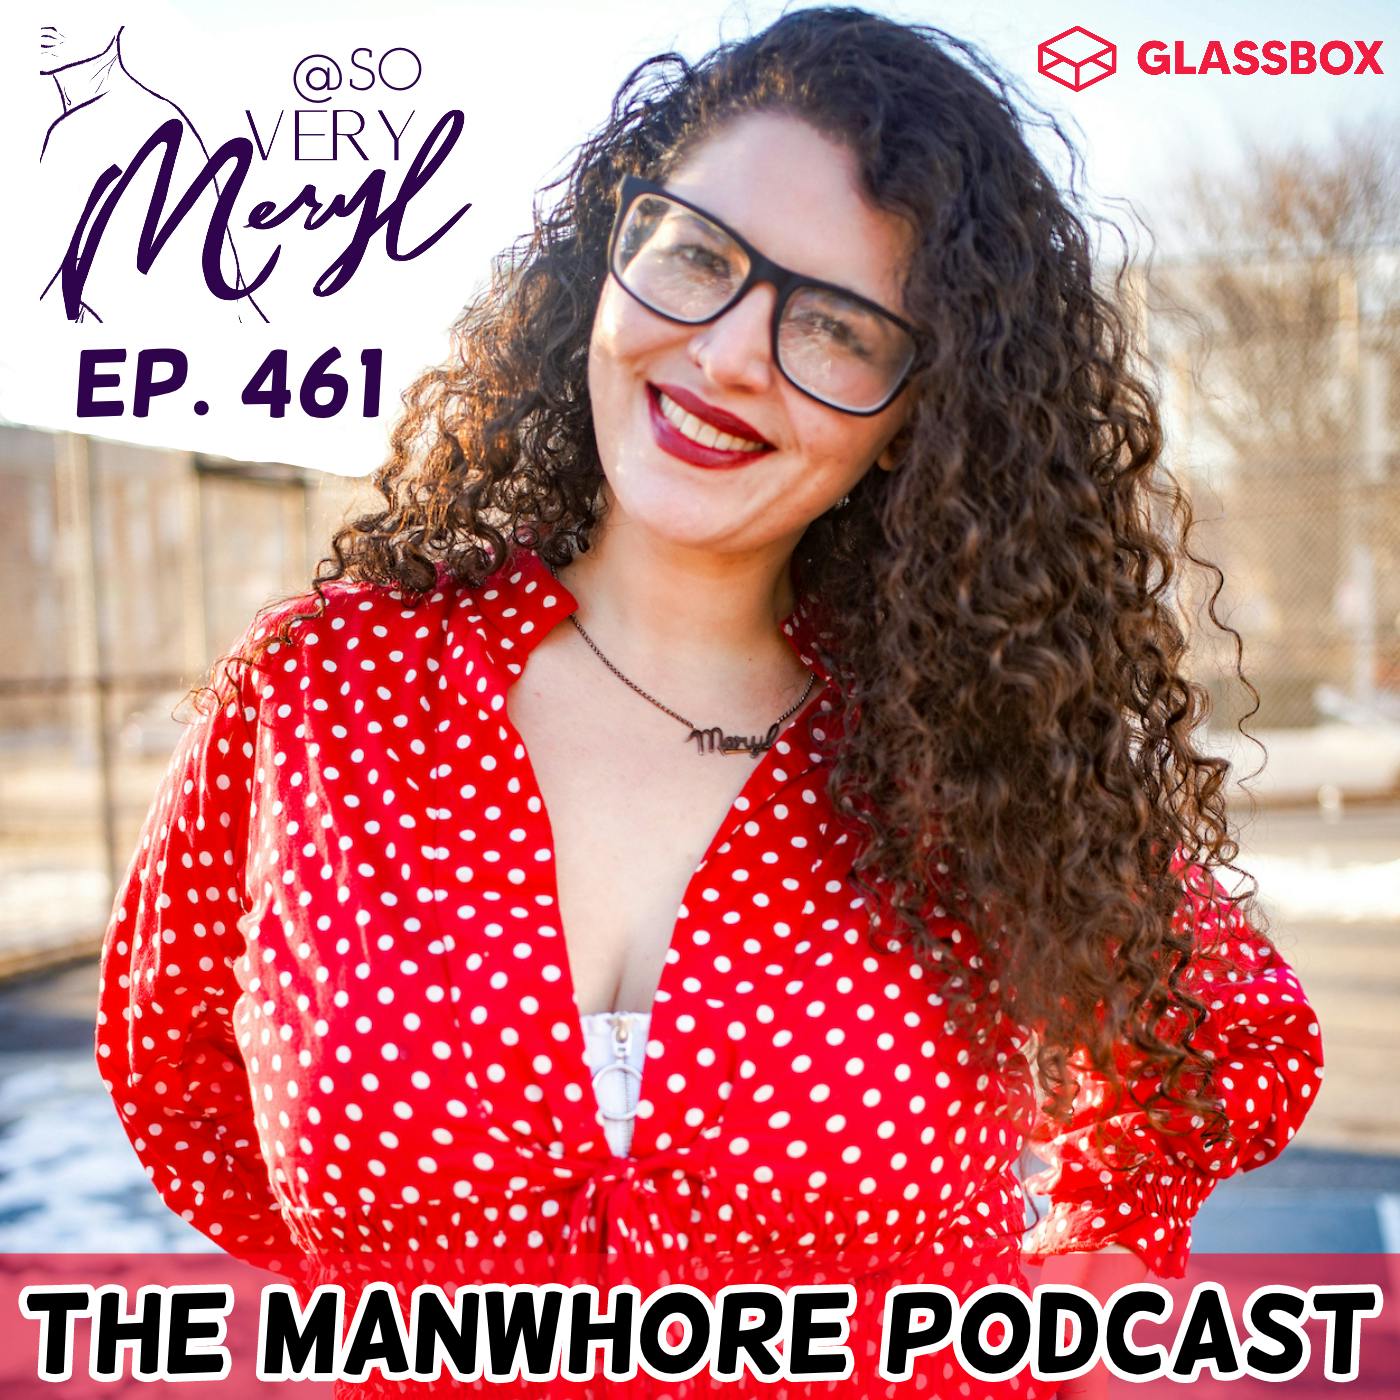 The Manwhore Podcast: A Sex-Positive Quest - Ep. 461: What is Love Play?